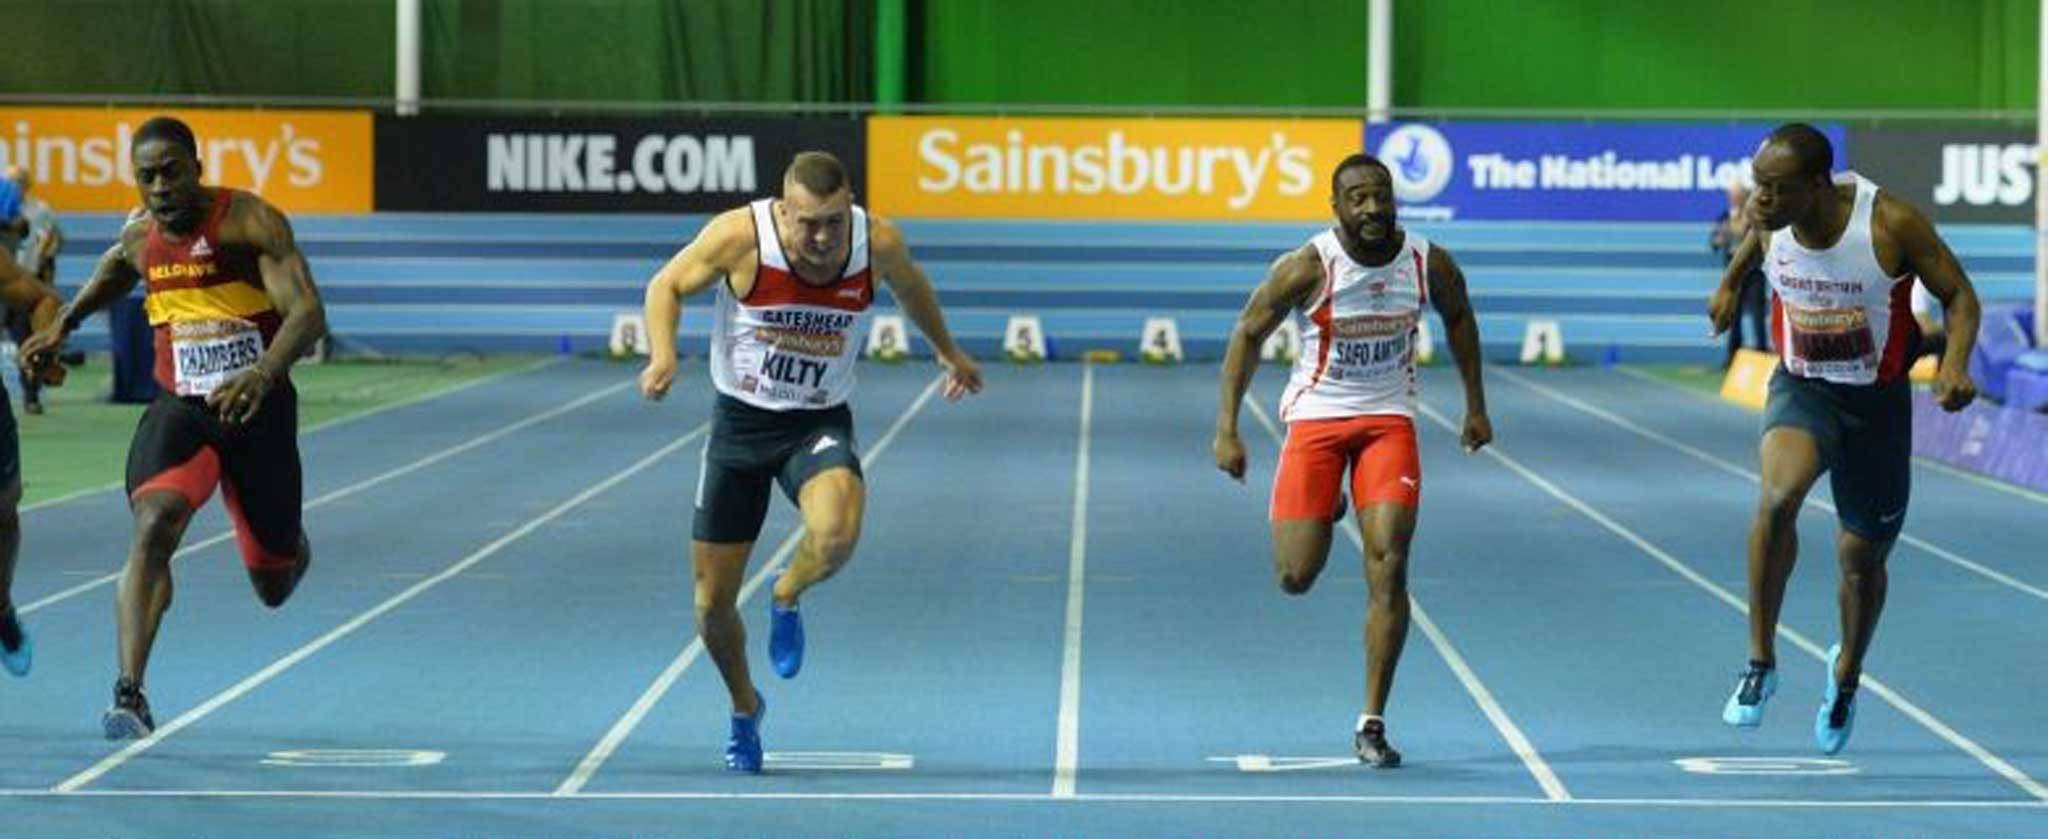 Sideways glance: James Dasaolu (far right) looks across the track at the finish to confirm that he has beaten Dwain Chambers (far left) despite a slow start